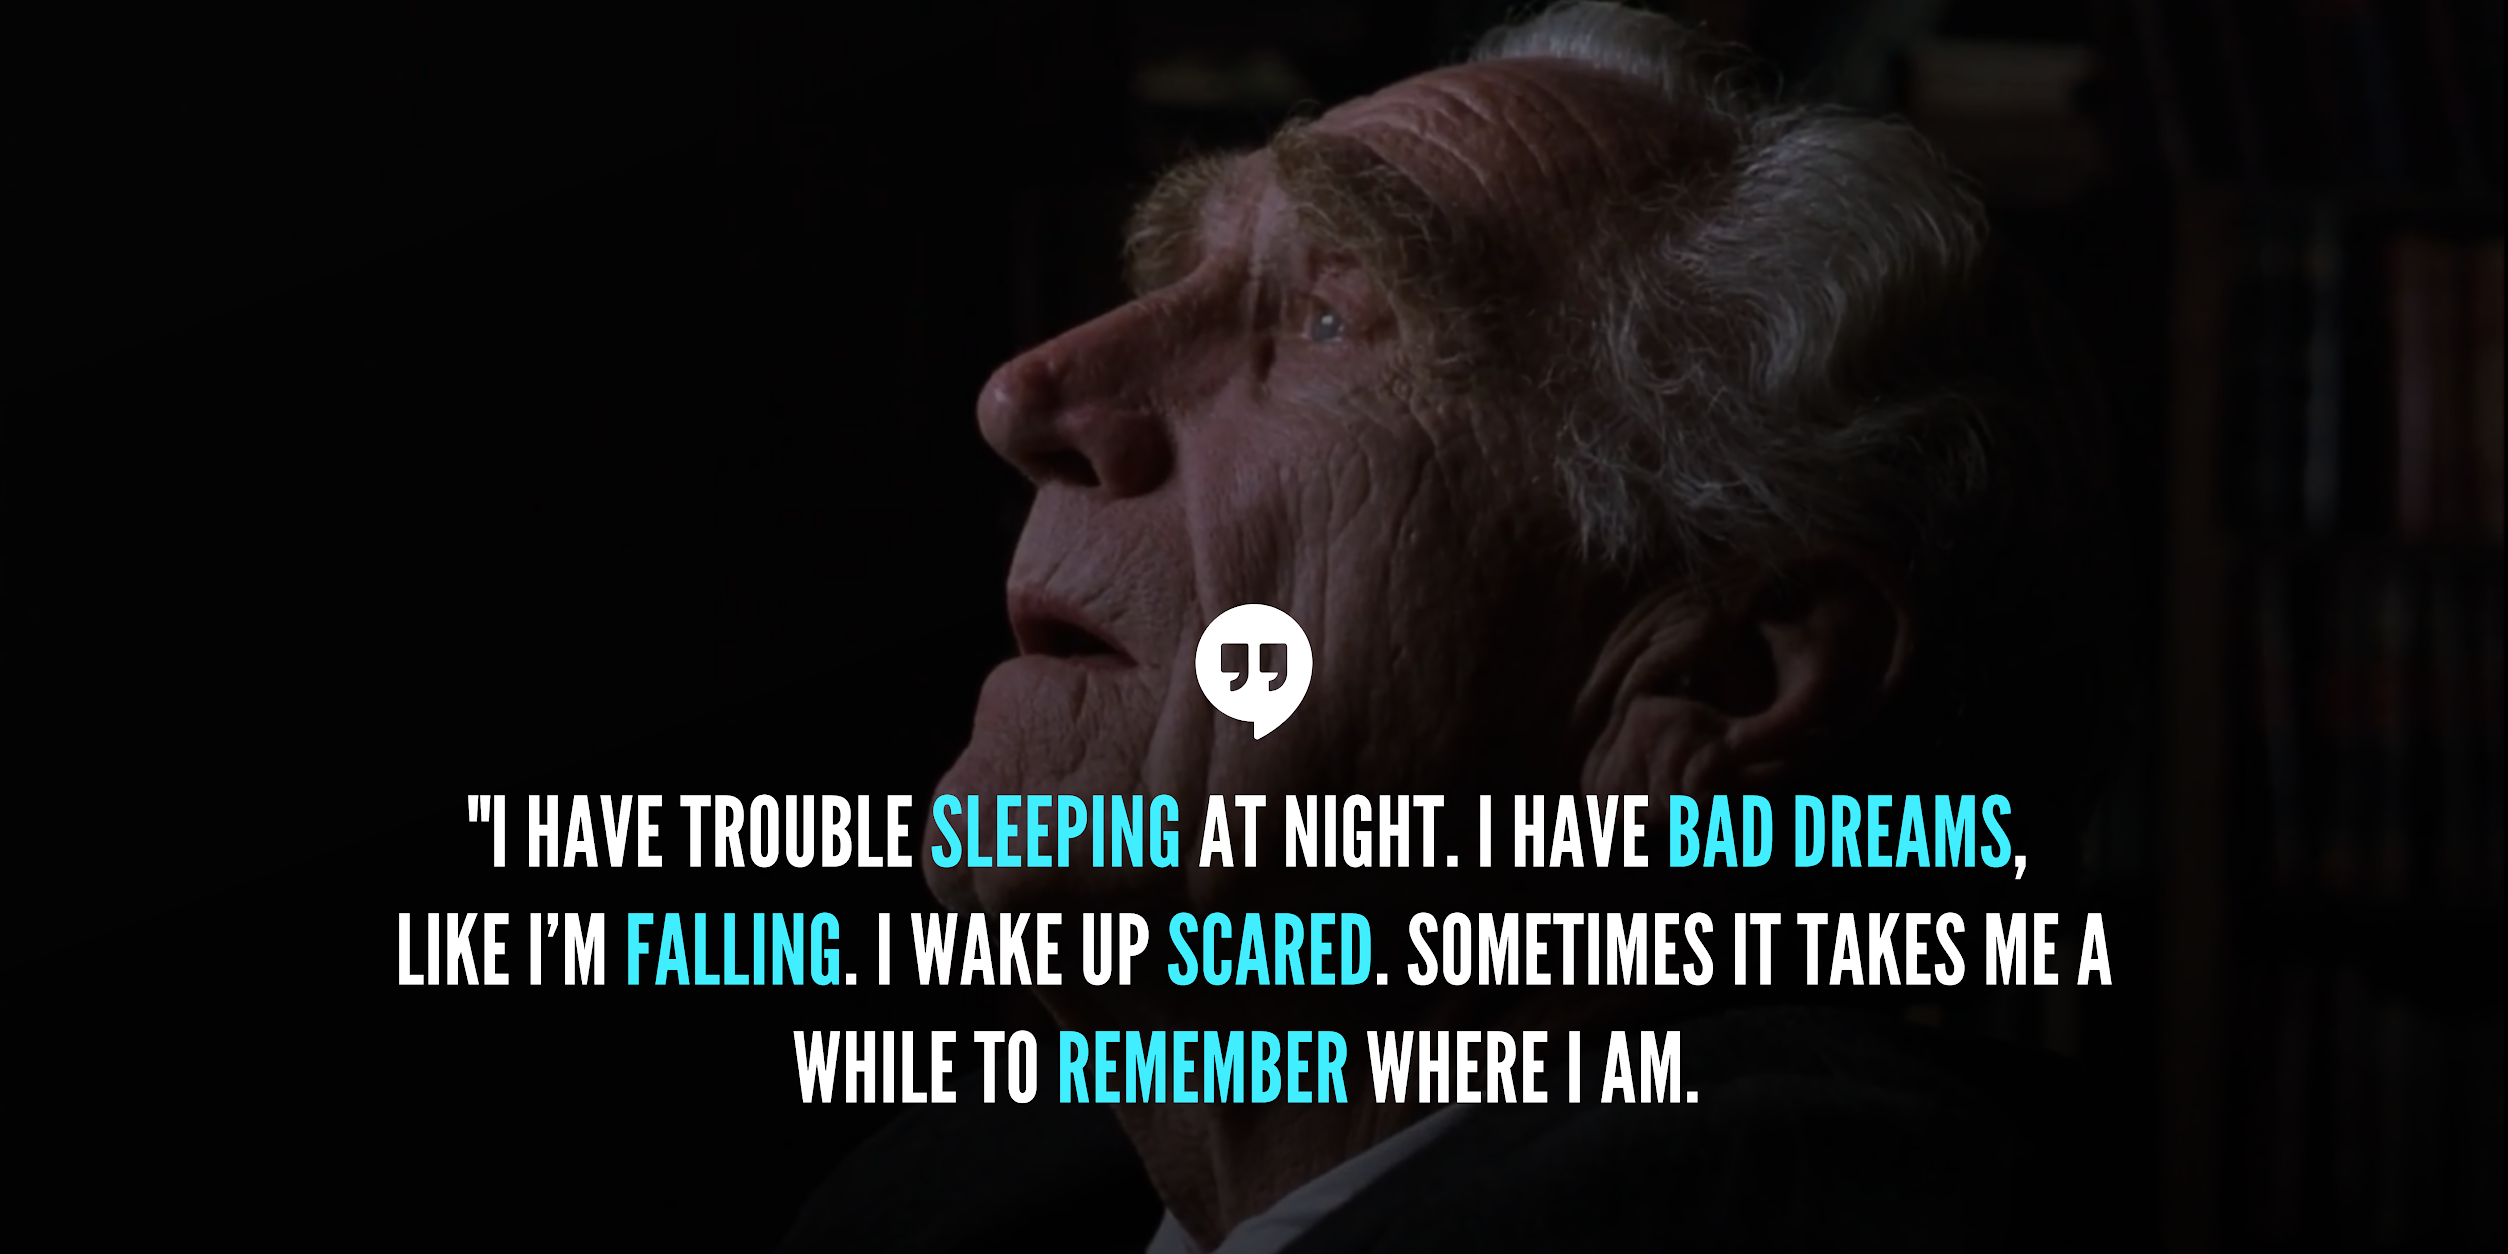 I have trouble sleeping at night. I have bad dreams, like I’m falling. I wake up scared. Sometimes it takes me a while to remember where I am.